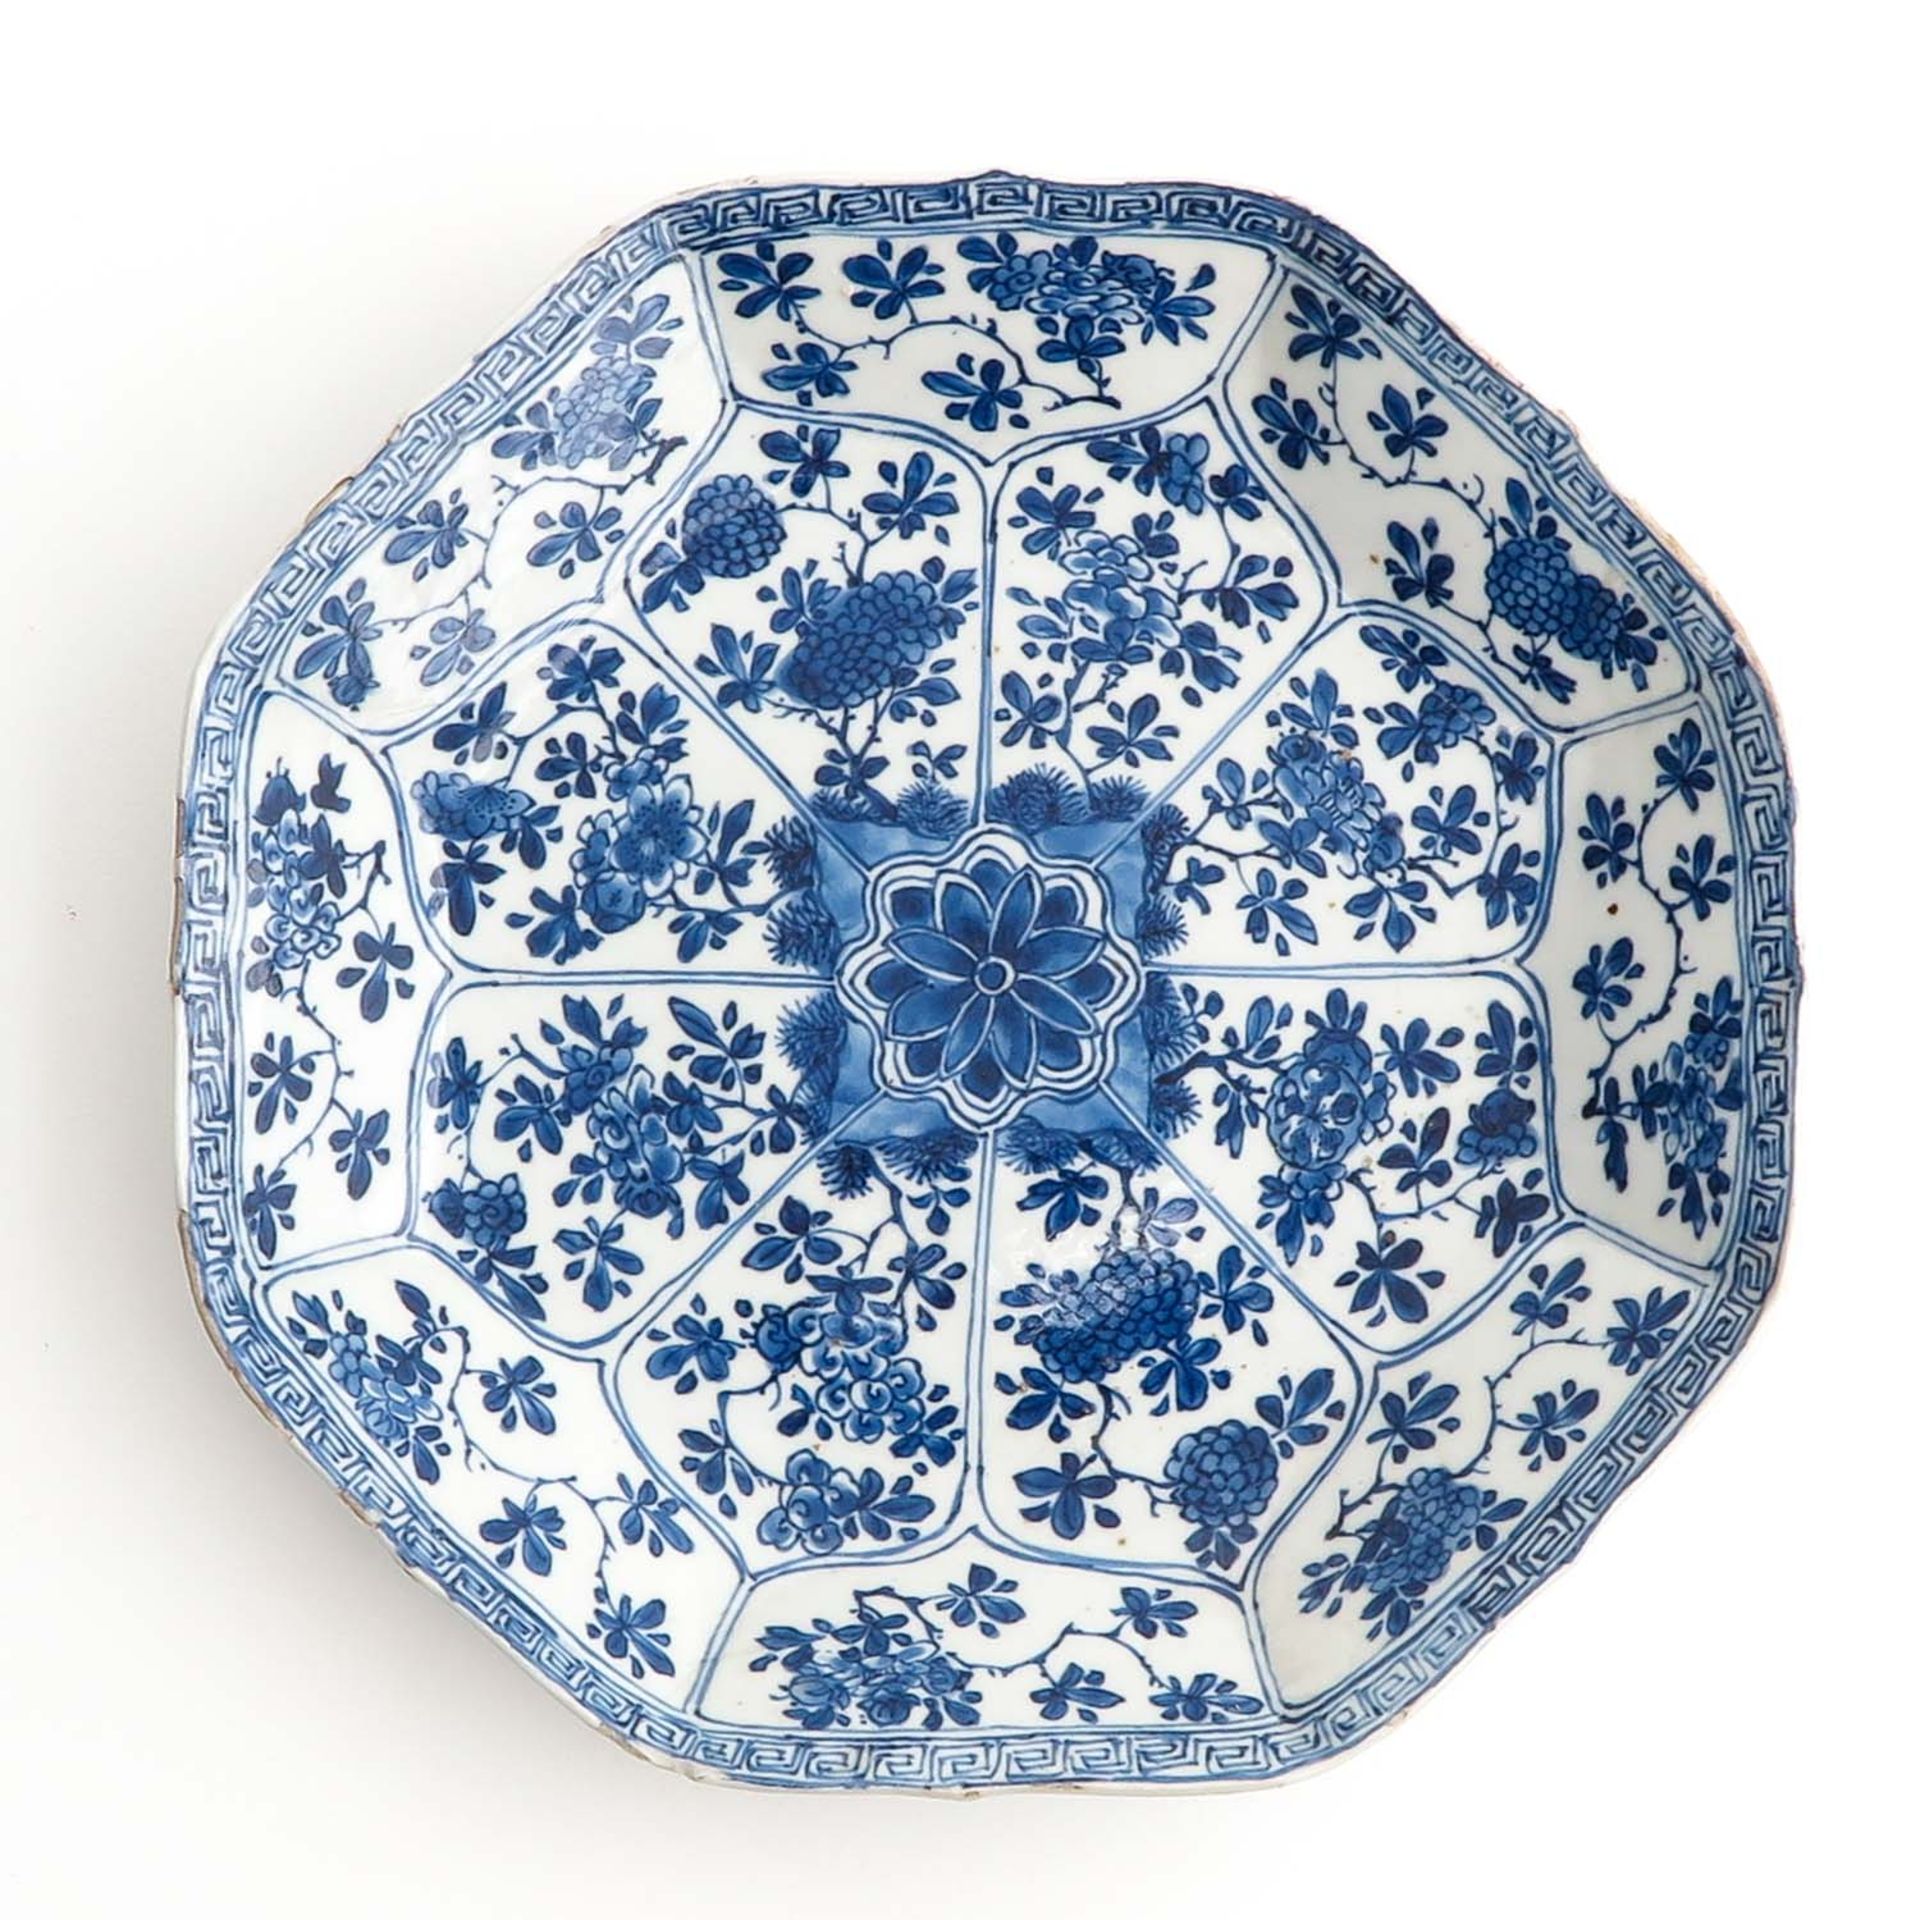 Two Blue and White Plates - Image 3 of 10